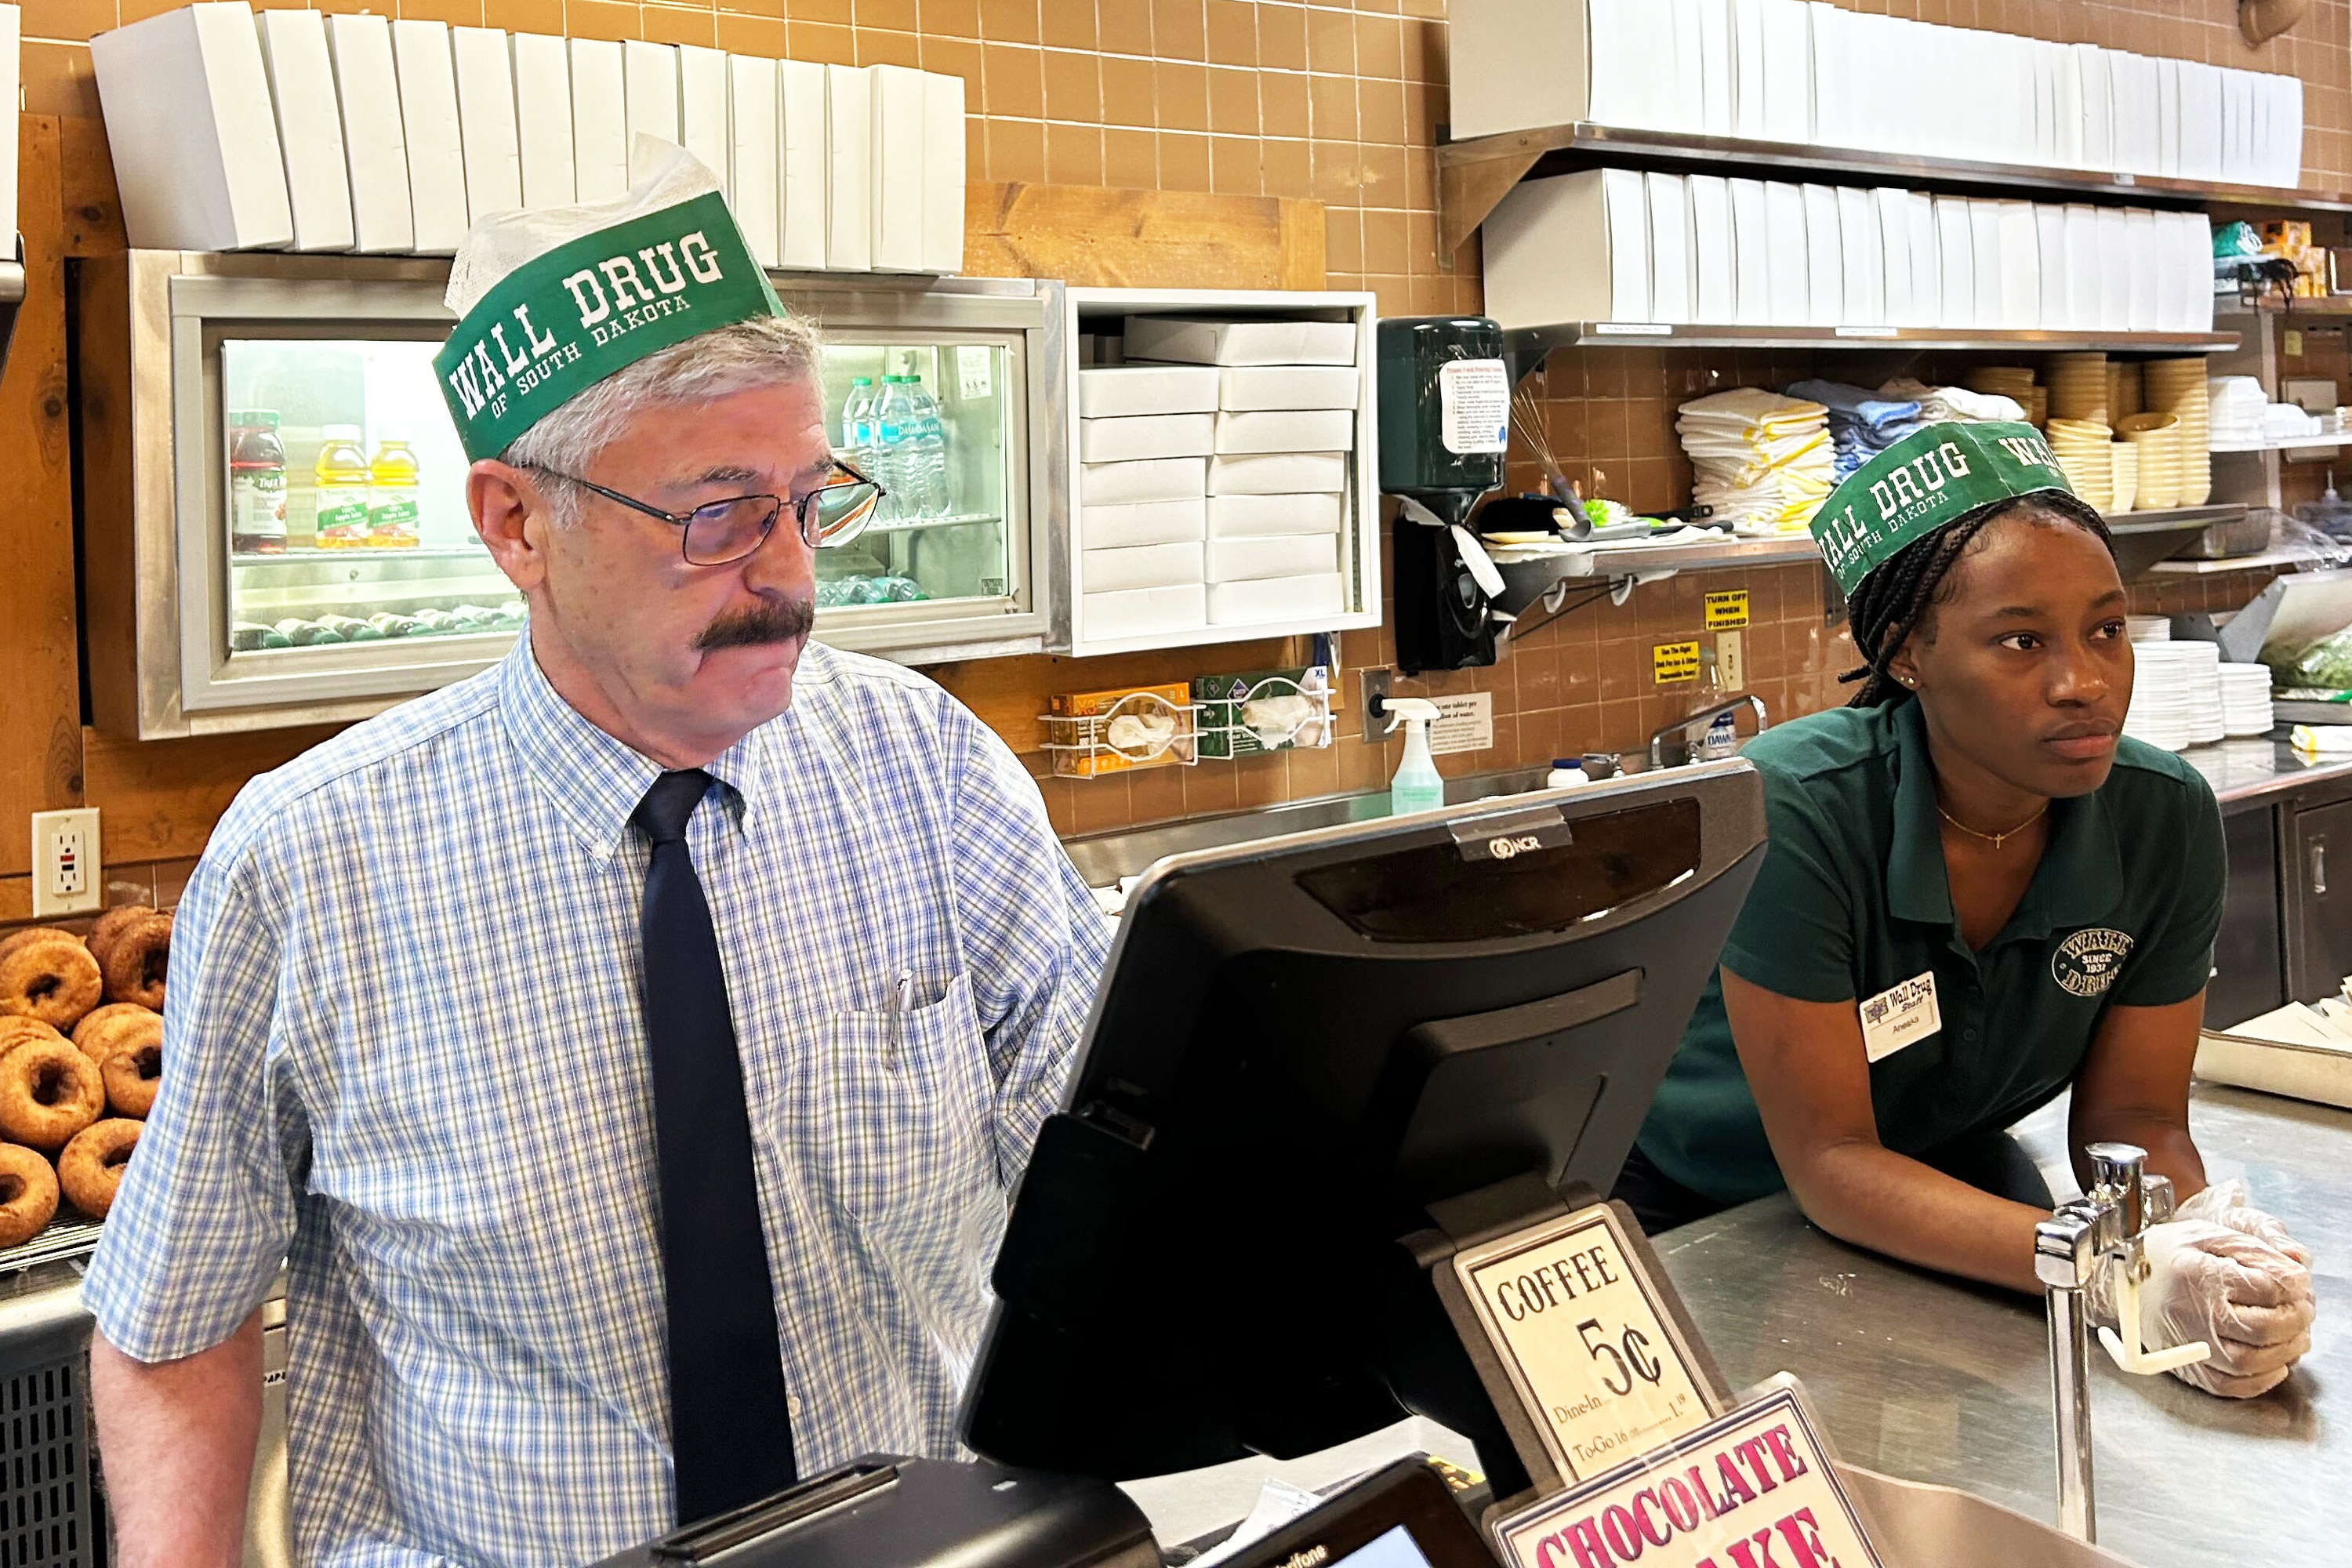 A photo of an older man working behind a counter with a young woman.